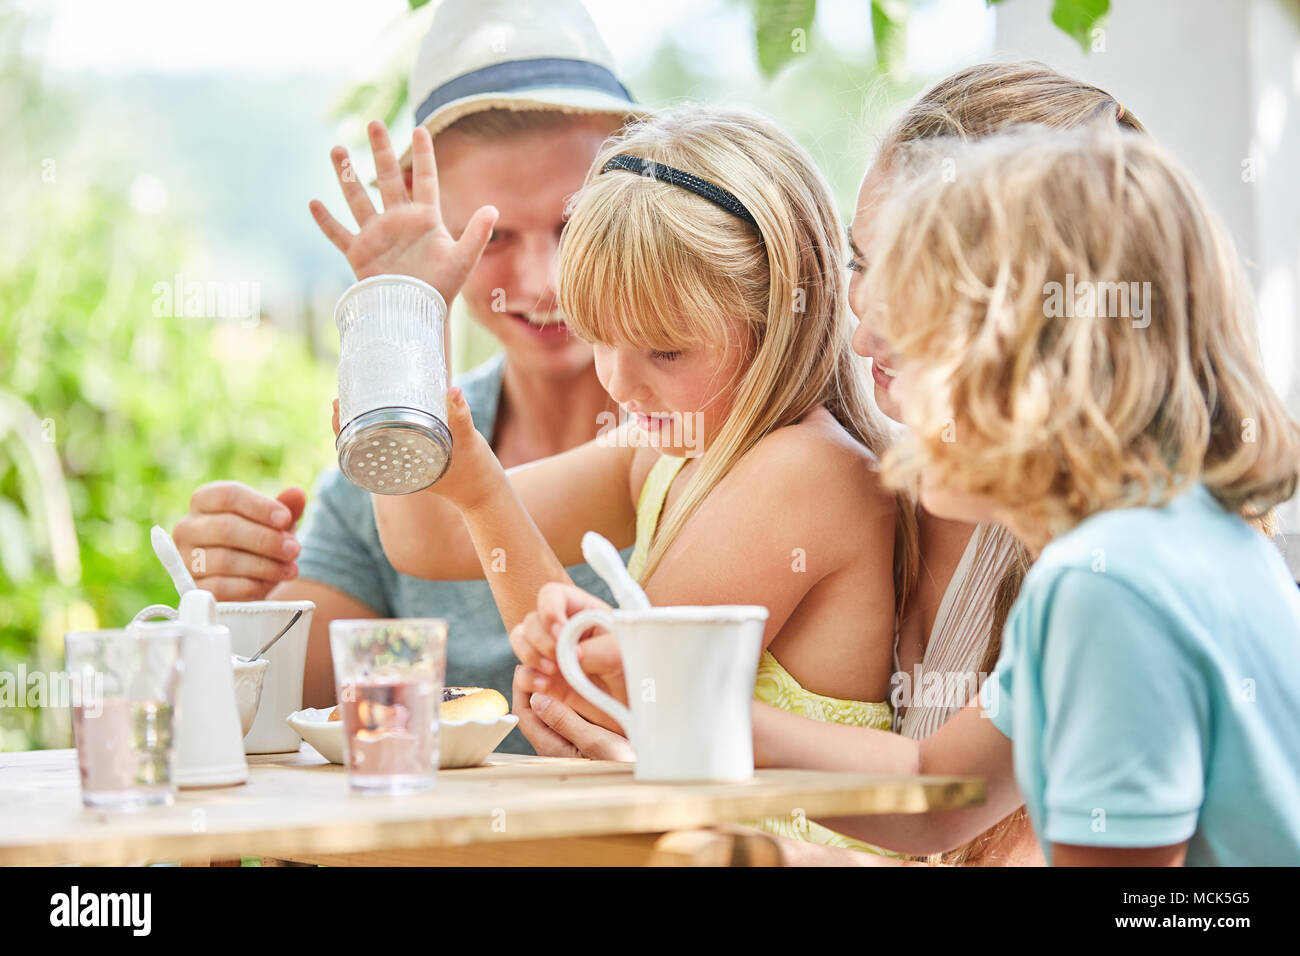 Family and girl with sugar shaker at the coffee table in the garden Stock Photo